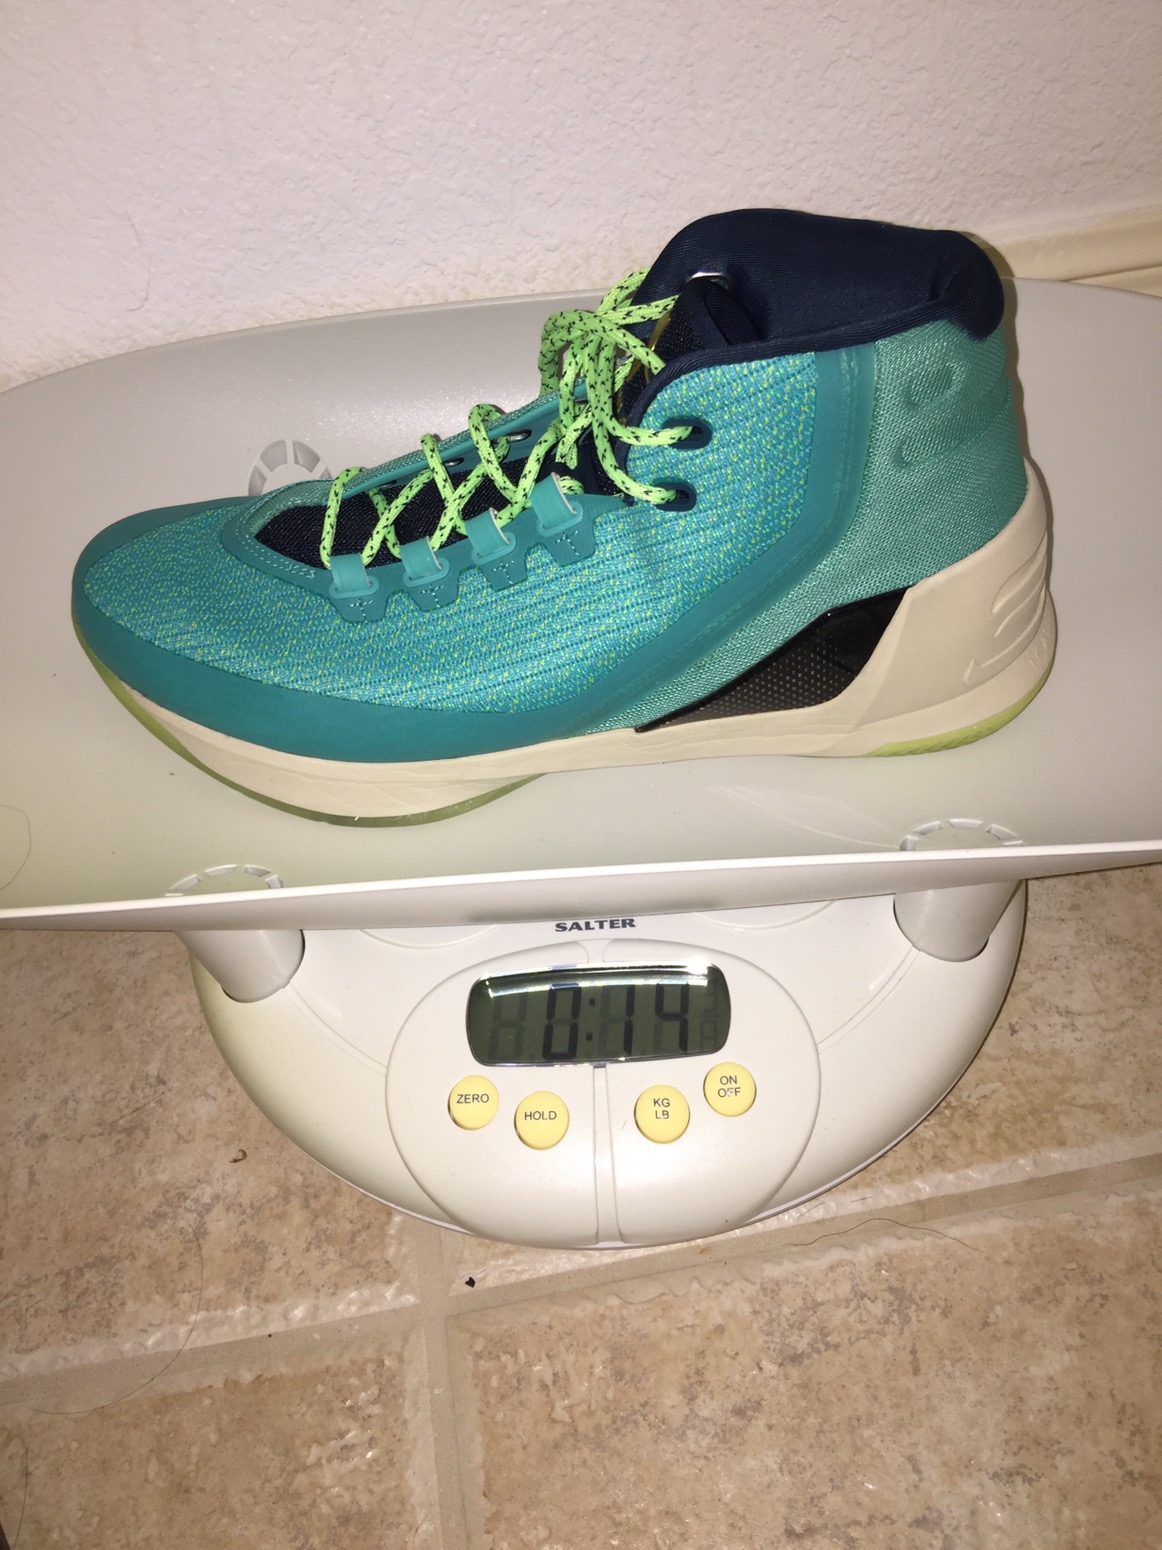 curry 3 shoes review